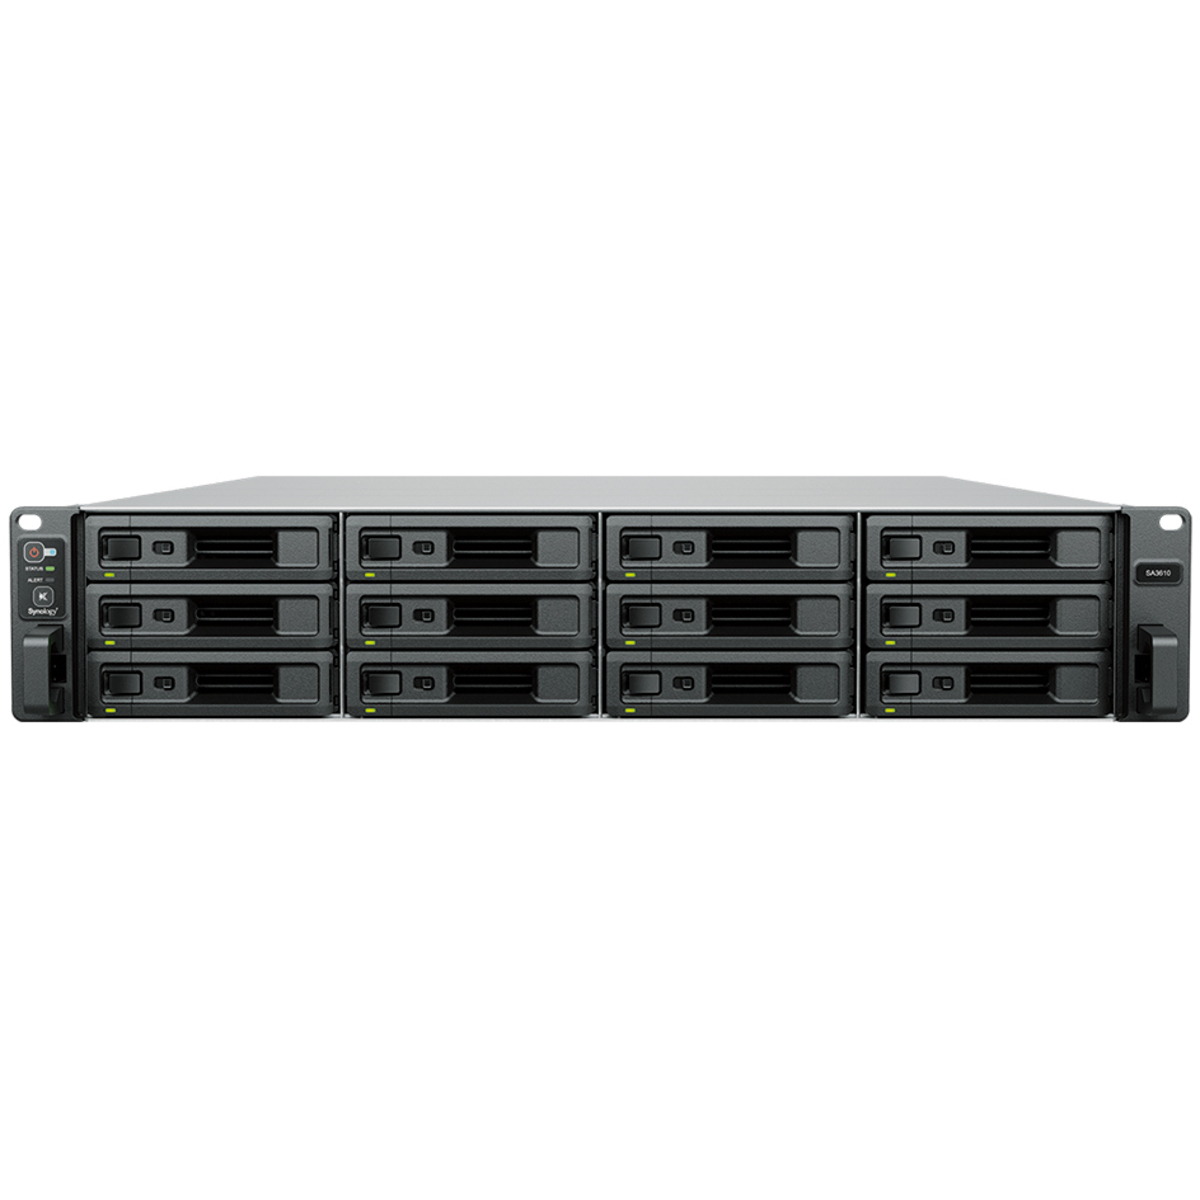 Synology RackStation SA3410 14tb 12-Bay RackMount Large Business / Enterprise NAS - Network Attached Storage Device 7x2tb Western Digital Red Pro WD2002FFSX 3.5 7200rpm SATA 6Gb/s HDD NAS Class Drives Installed - Burn-In Tested RackStation SA3410